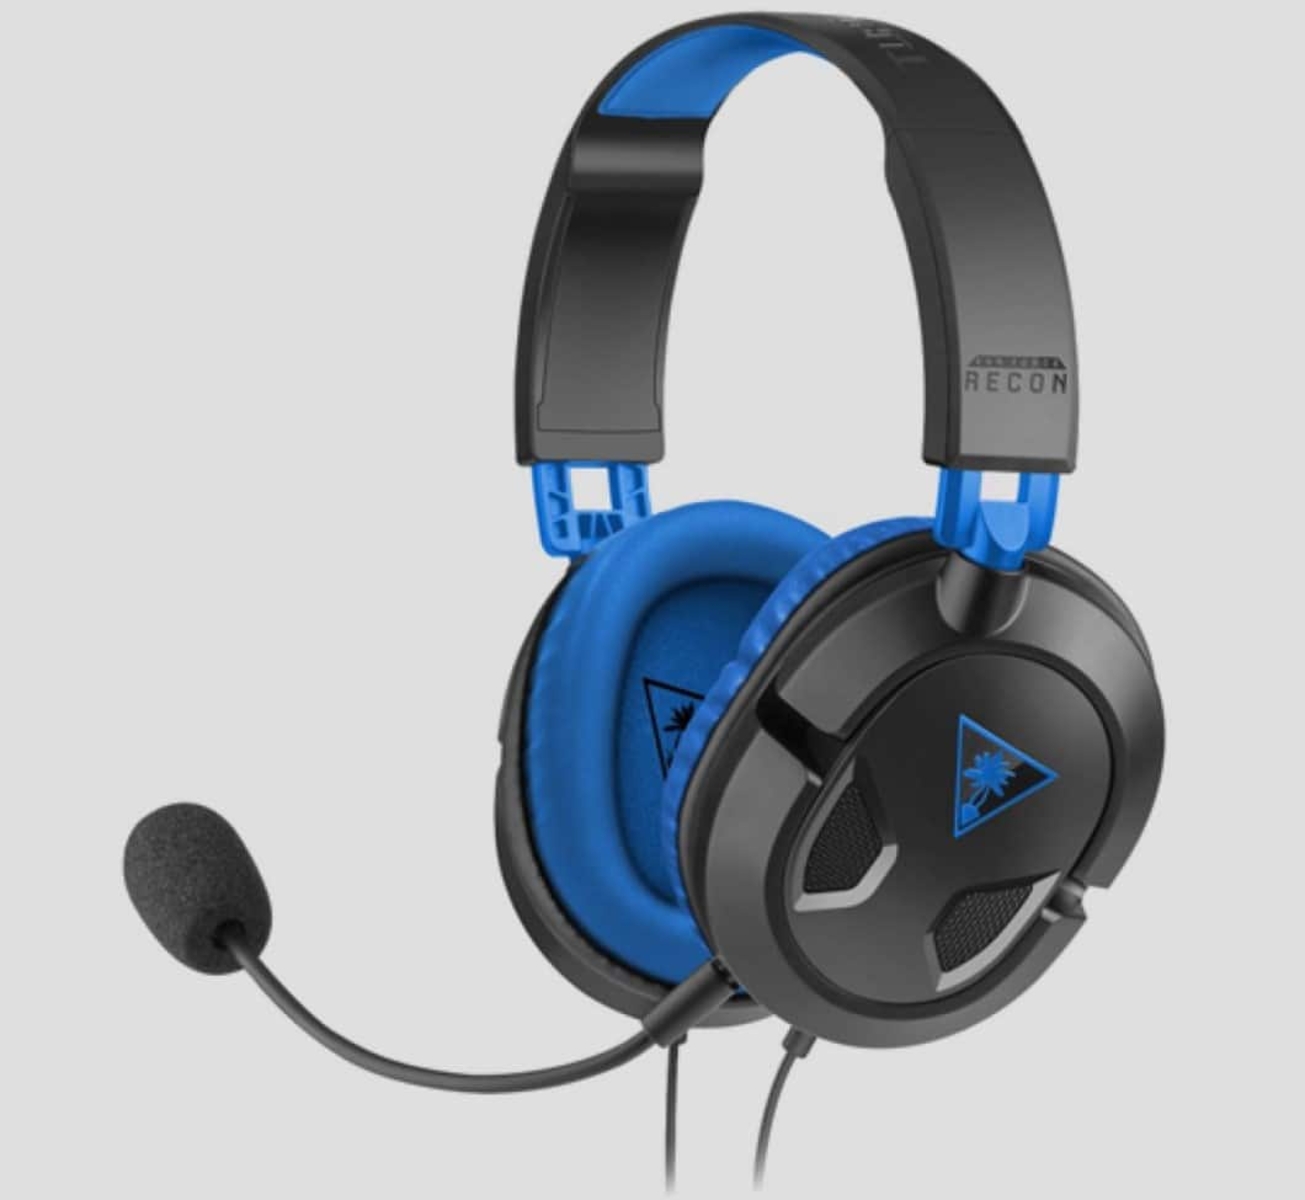 What Gaming Headset Is Better: PX2 Or The Recon 60P